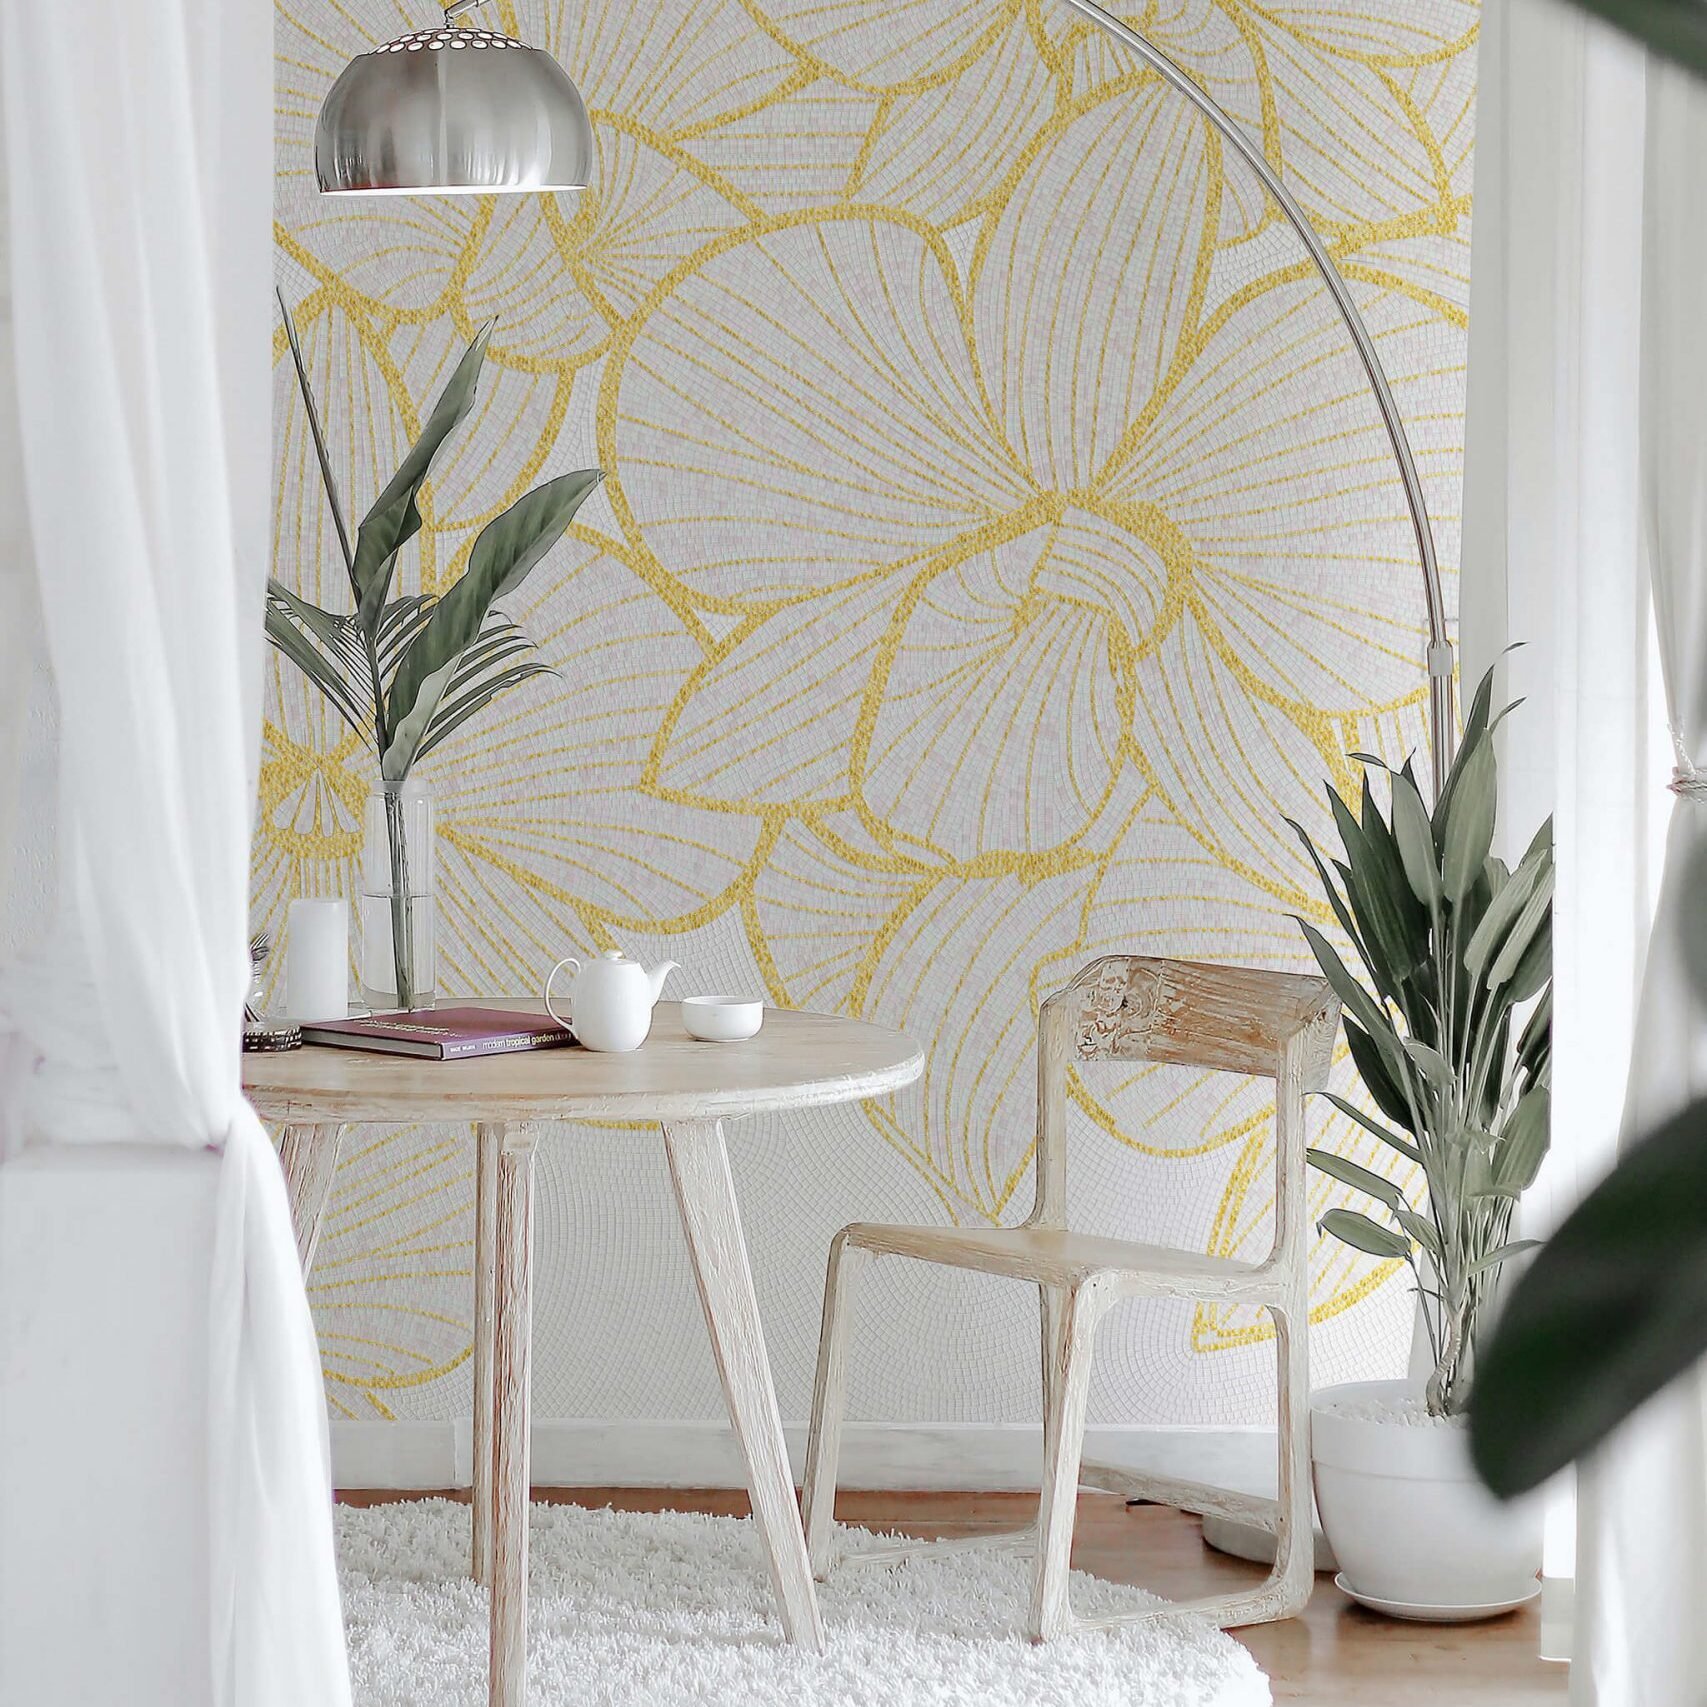 LIVING-ROOM-GOLD-ORCHIDS-scaled-square-688c1f28a63a5945ae2eb6f017d74f9f-5ba6a531930e0.jpg